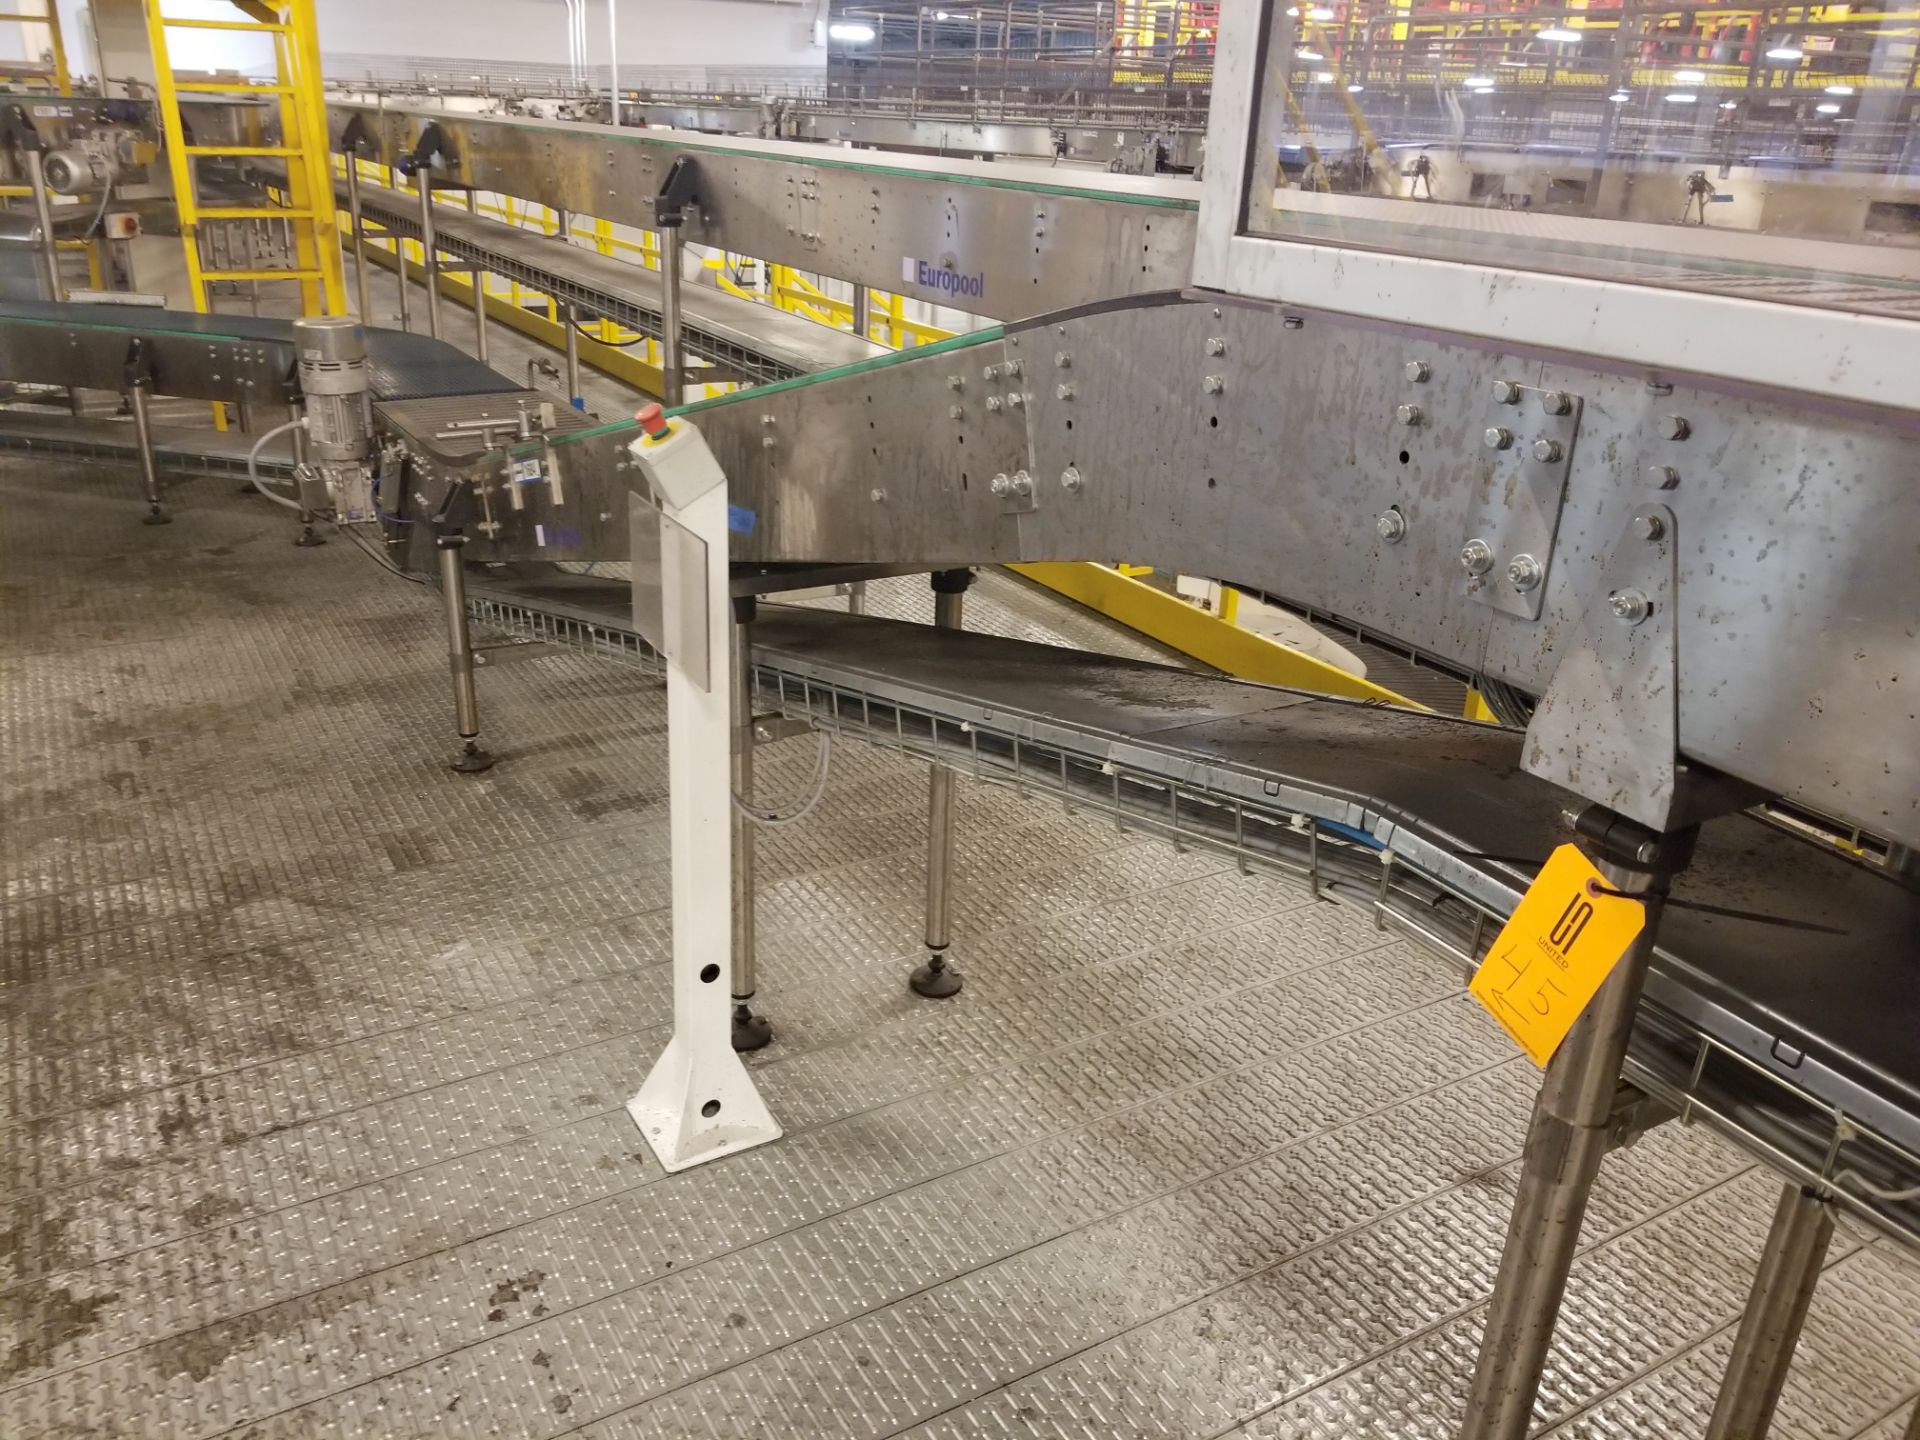 Approx. 45 feet of Europool Case Conveyor - Discharge of Case Switch